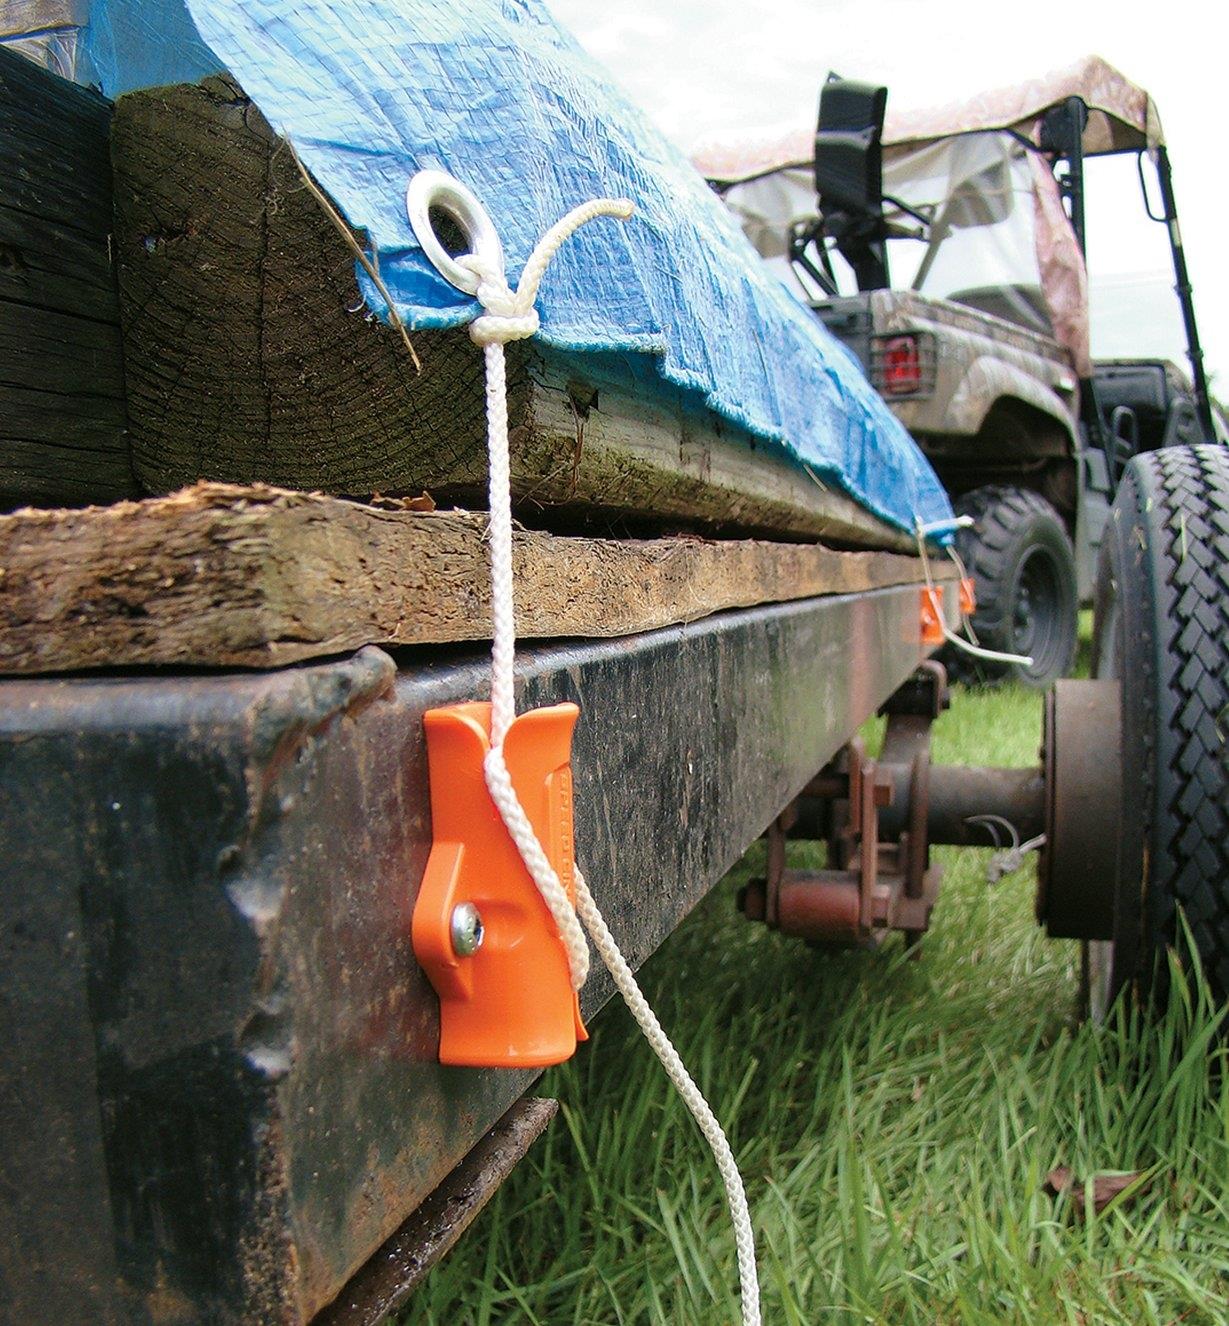 Speed Cinch Tie-Down Utility Cinch secures a tarp over a load on a trailer